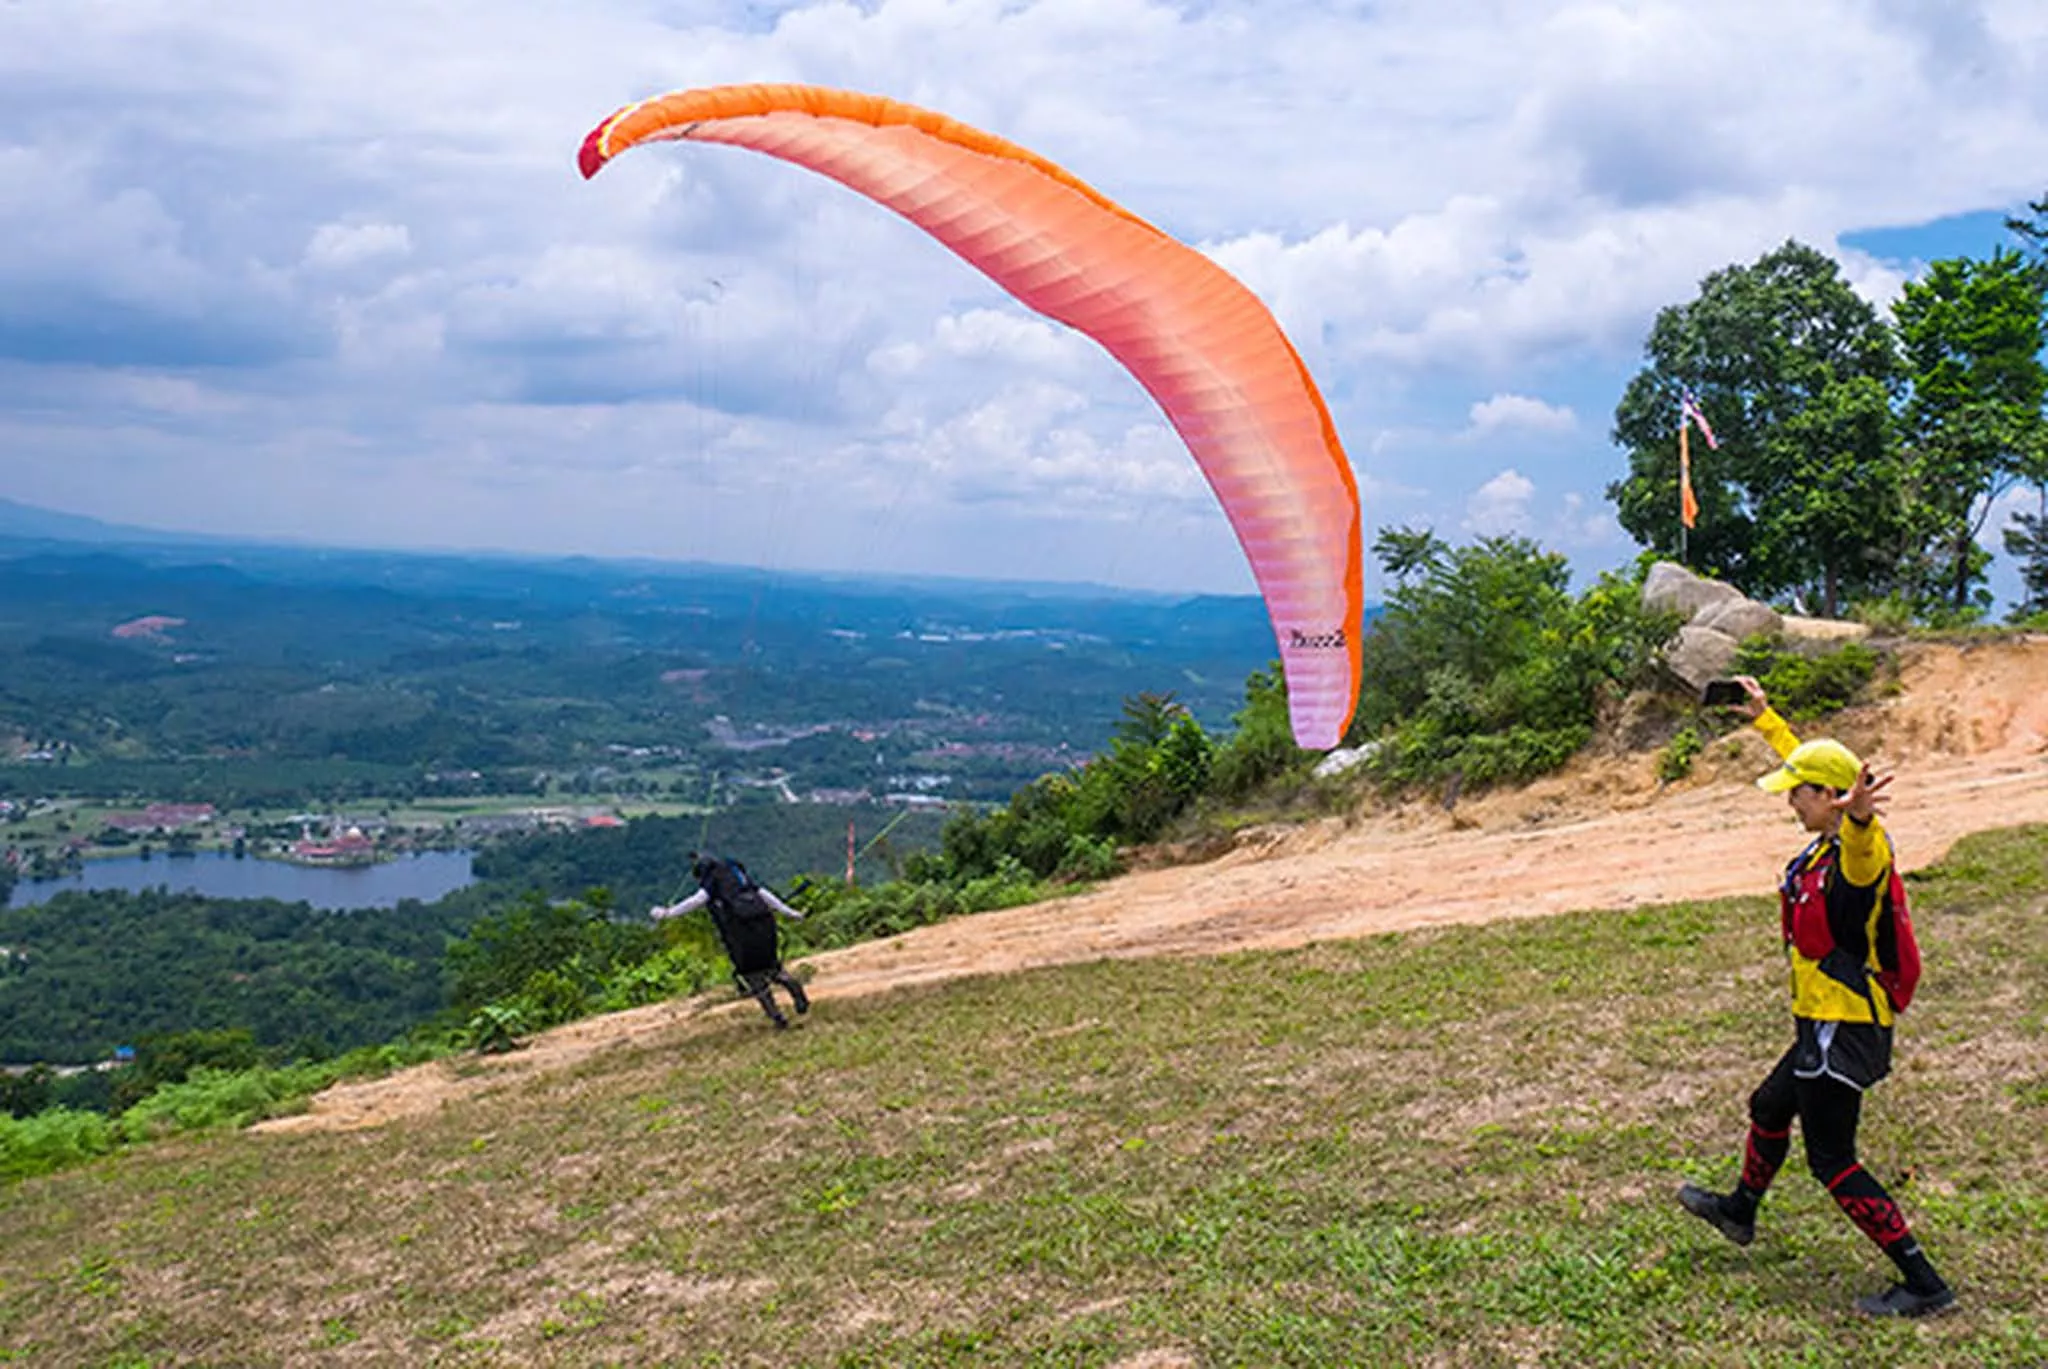 Jugra Hill in Malaysia, East Asia | Trekking & Hiking,Paragliding - Rated 1.2